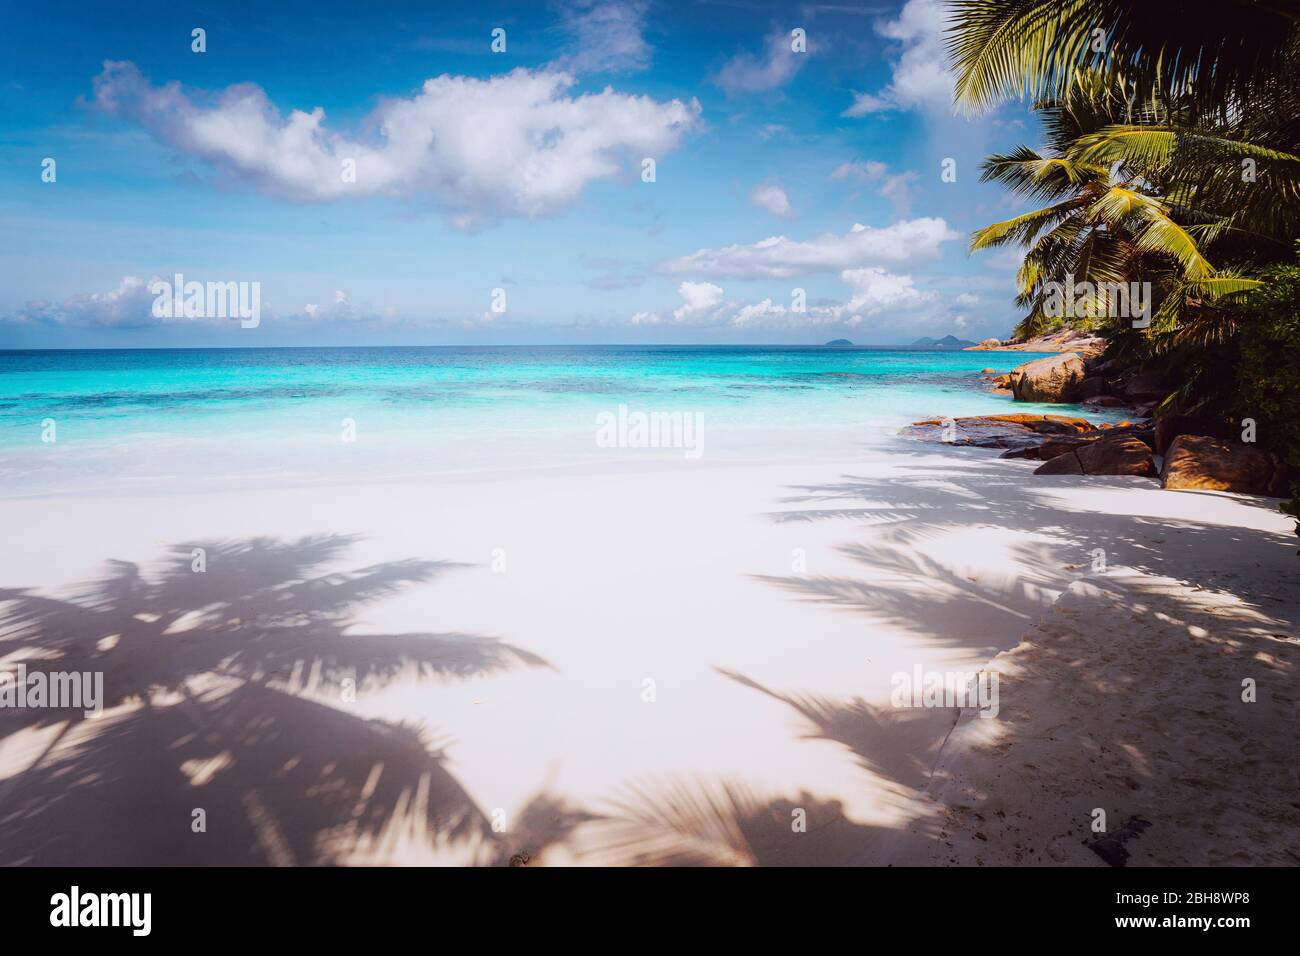 Idyllic perfect tropical dream beach. Powdery white sand, crystal-clear water, summertime vacation Seychelles. Stock Photo